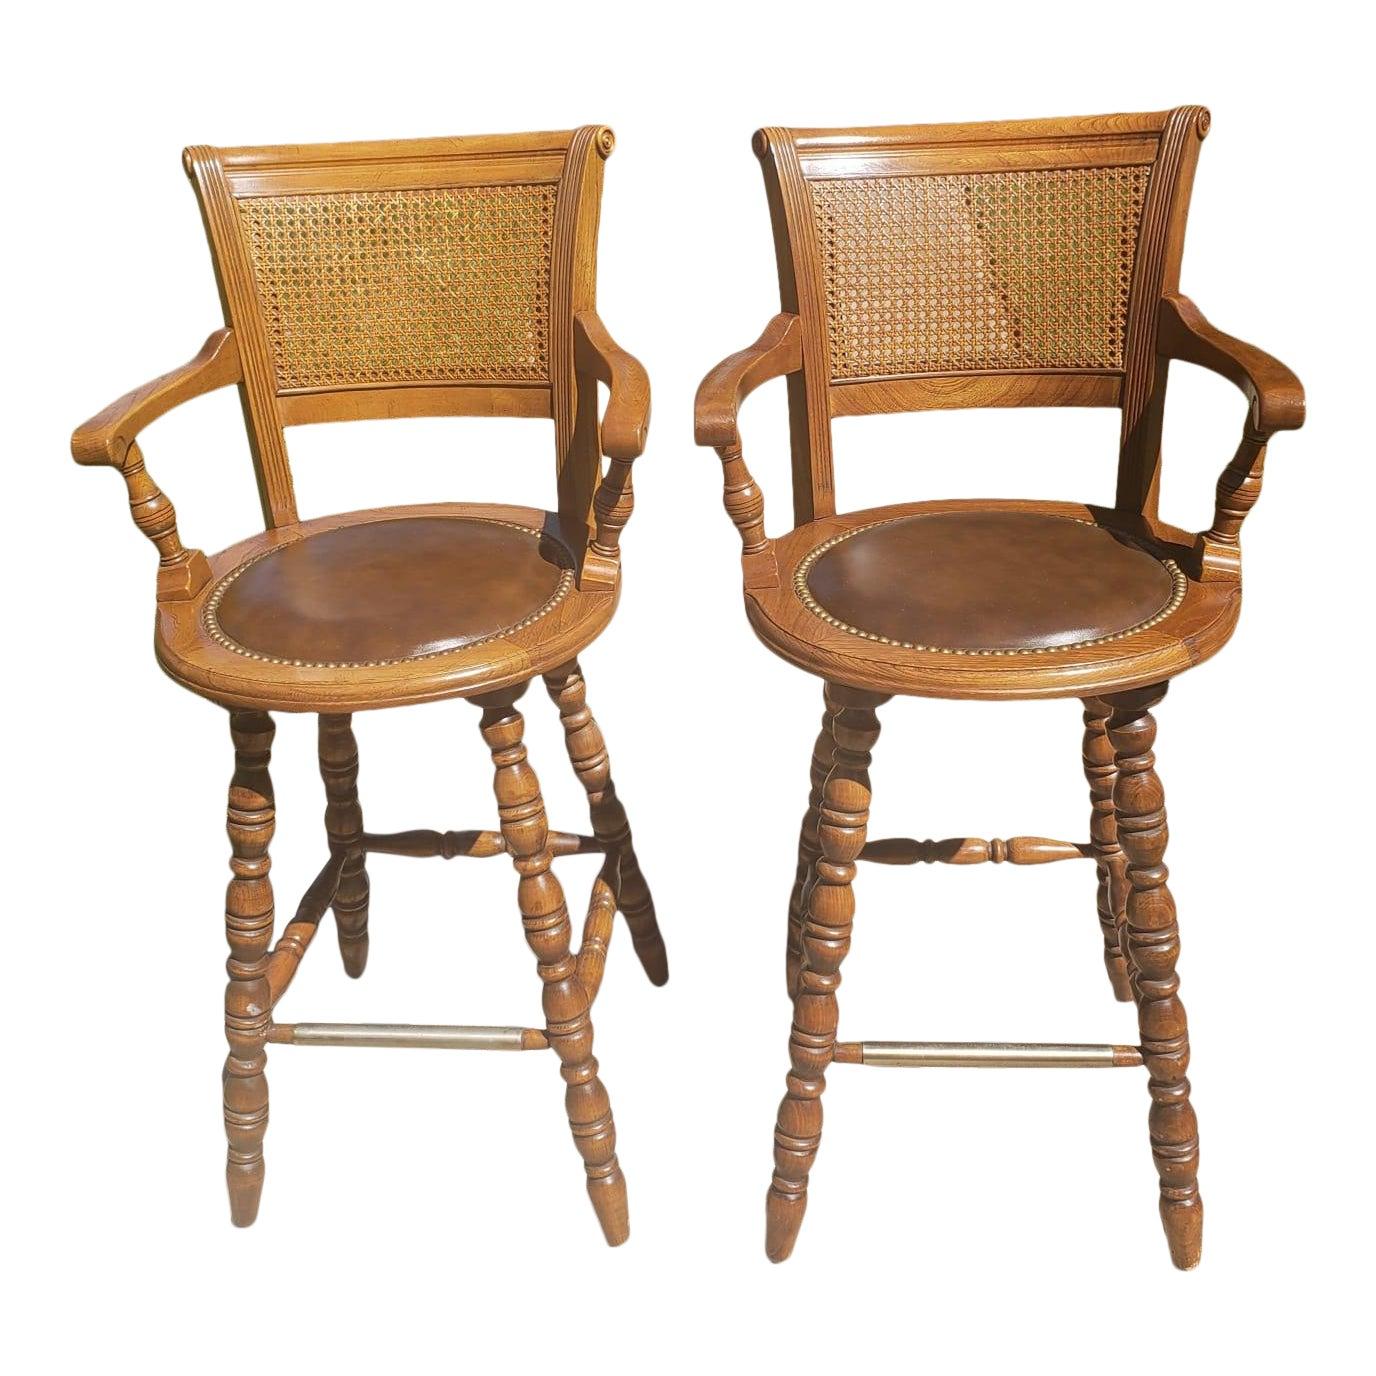 1970s Vintage Full Grain Leather and Caning Swivel Oak Bar Stools, a Pair For Sale